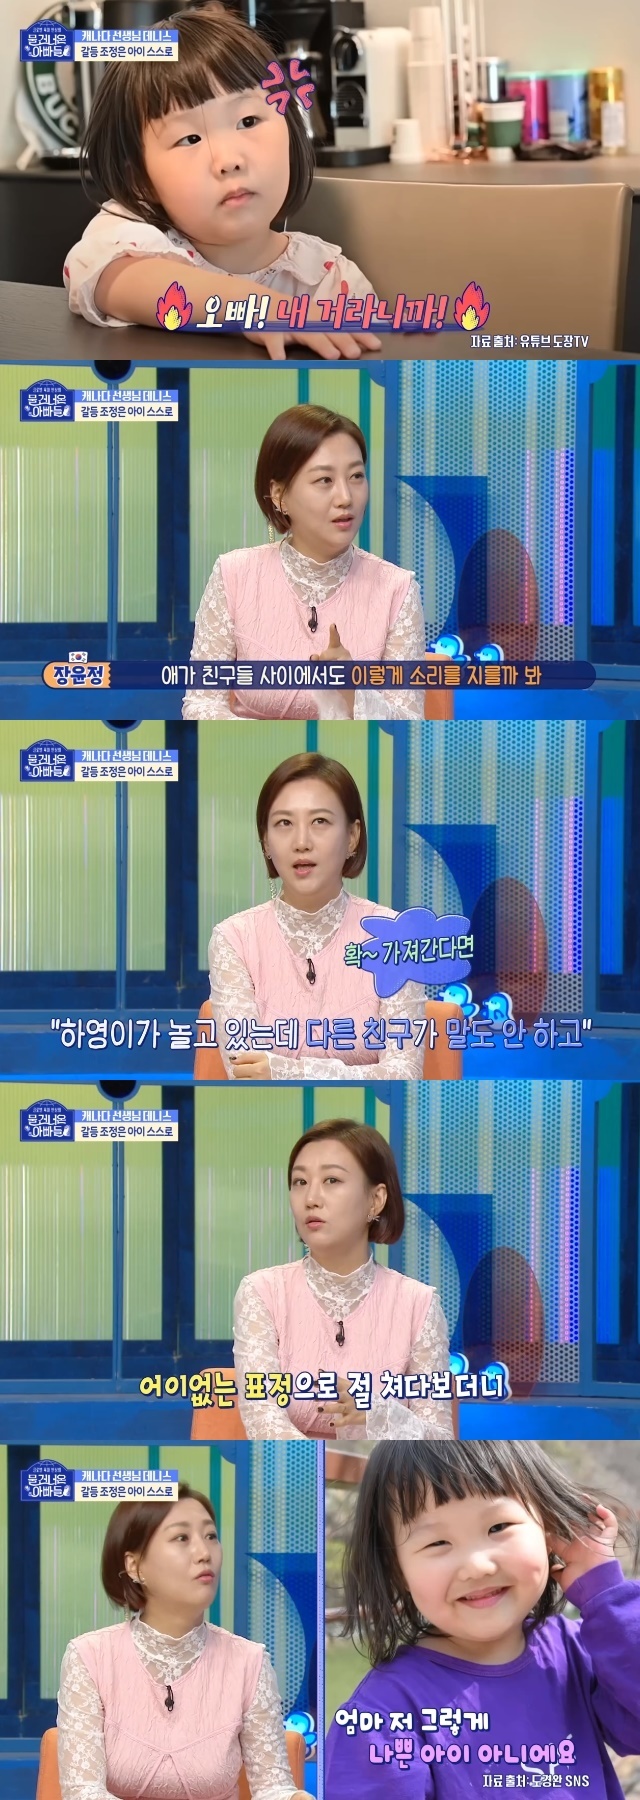 Jang Yun-jeong revealed the anecdote of Ha-yeong Lee,In the 34th MBC performance the water-crossed fathers broadcasted on June 4, the wise Twins child care law of Canadian Father Dennys, who is currently serving as the vice principal of Gyeonggi International School, was revealed.On this day, Dennys asked Twins daughter Brook to write a praise record on the white board when she had a concert with her brother Grace.Kim Na-young said, Yes, I forgot, and I insisted that I had a session last time.In the studio, there is a lot of concession to my brother mind in Korea.A consultation is typically something that should be praised when you do well, said no gyu-sik Doctorate, a specialist in general health medicine at a parenting mentor. If you dont do a consultation, you shouldnt say, Why do you do it because youre older and youre older, but when you do a consultation, you should say, Thank you for the difficult behavior.In addition, no gyu-sik Doctorate advised Minori, a Japanese father who is worried about his son who is not good at a concession because he is an only child, to take him to volunteer activities and teach him to give.Among Dennys parenting methods, the Twins daughters refusal to intervene as a parent when fighting over one item was also well-received.According to the no gyu-sik Doctorate, this behavior has the advantage of making it instinctive to think that it is better to solve this problem and have a good time while at the same time focusing on things or events without thinking Mom, Father likes him more.However, no gyu-sik Doctorate advised me to keep a distance as long as I can see that there may be cases where children fight.At this time, Kim Na-young asked, My family did not intervene because they told me not to intervene, but a child who couldnt bear it kept getting hit. They lost money, and asked if he could leave it alone.No gyu-sik Doctorate said, You just have to try to soothe your heart. Its better to just hug it so you do not get upset. If you try to balance it, it goes wrong from here.When I continue to be beaten by my brothers, I learn skills to win. I get better social skills than my peers. I get hard training unexpectedly. Jang Yun-jeong guessed that in the second case, Friends will fly in No Strings Attached.Jang Yun-jeong said, When we see Ha-yeong and Ha-yeong fighting, Ha-yeong says, Its my brother!I was worried hed yell when he didnt get his way in Friends No Strings Attached. So when Ha-yeong was playing, hed say, Hey!Ha-yeong looked at him with a look that he was too stupid and said, Mom, Im not such a bad boy. Jang Yun-jeong added, Knowing how to live among the children.